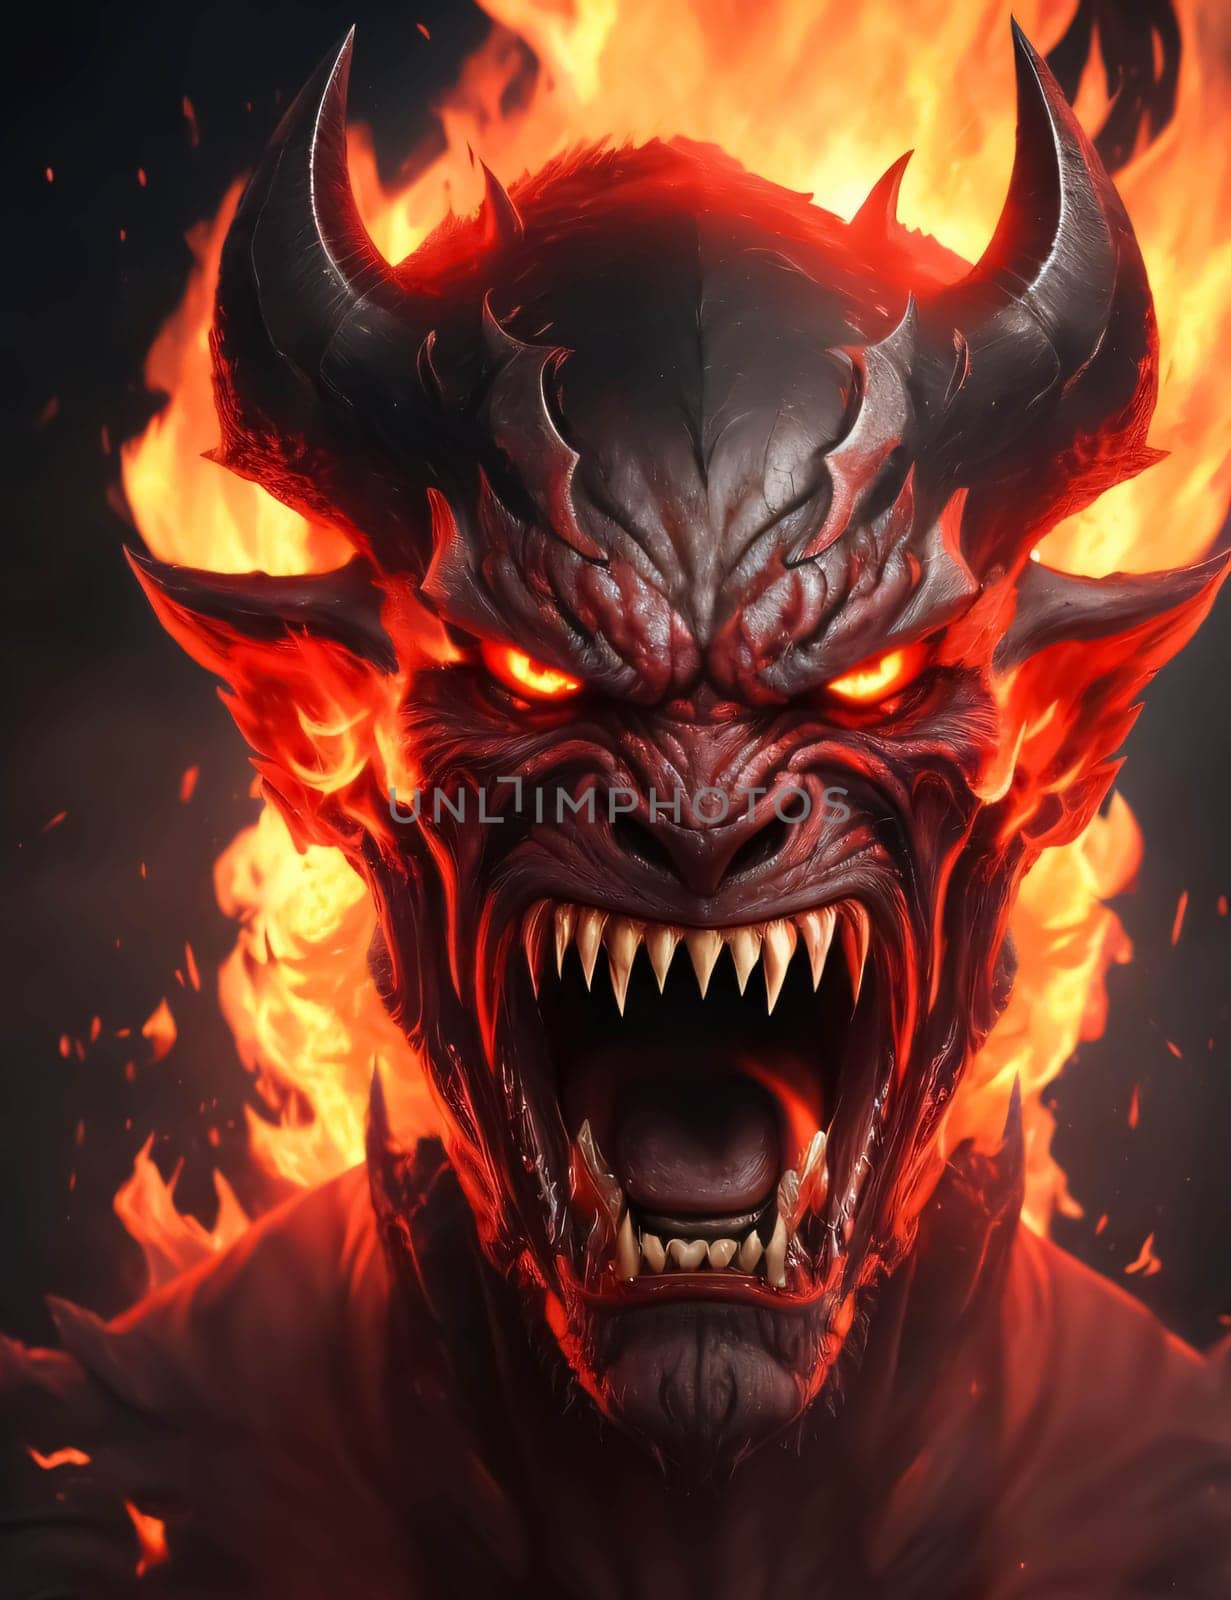 Devil, satan, demon, evil, lucifer, monster in hell and rage, super furious, super scary villain character for digital content creation